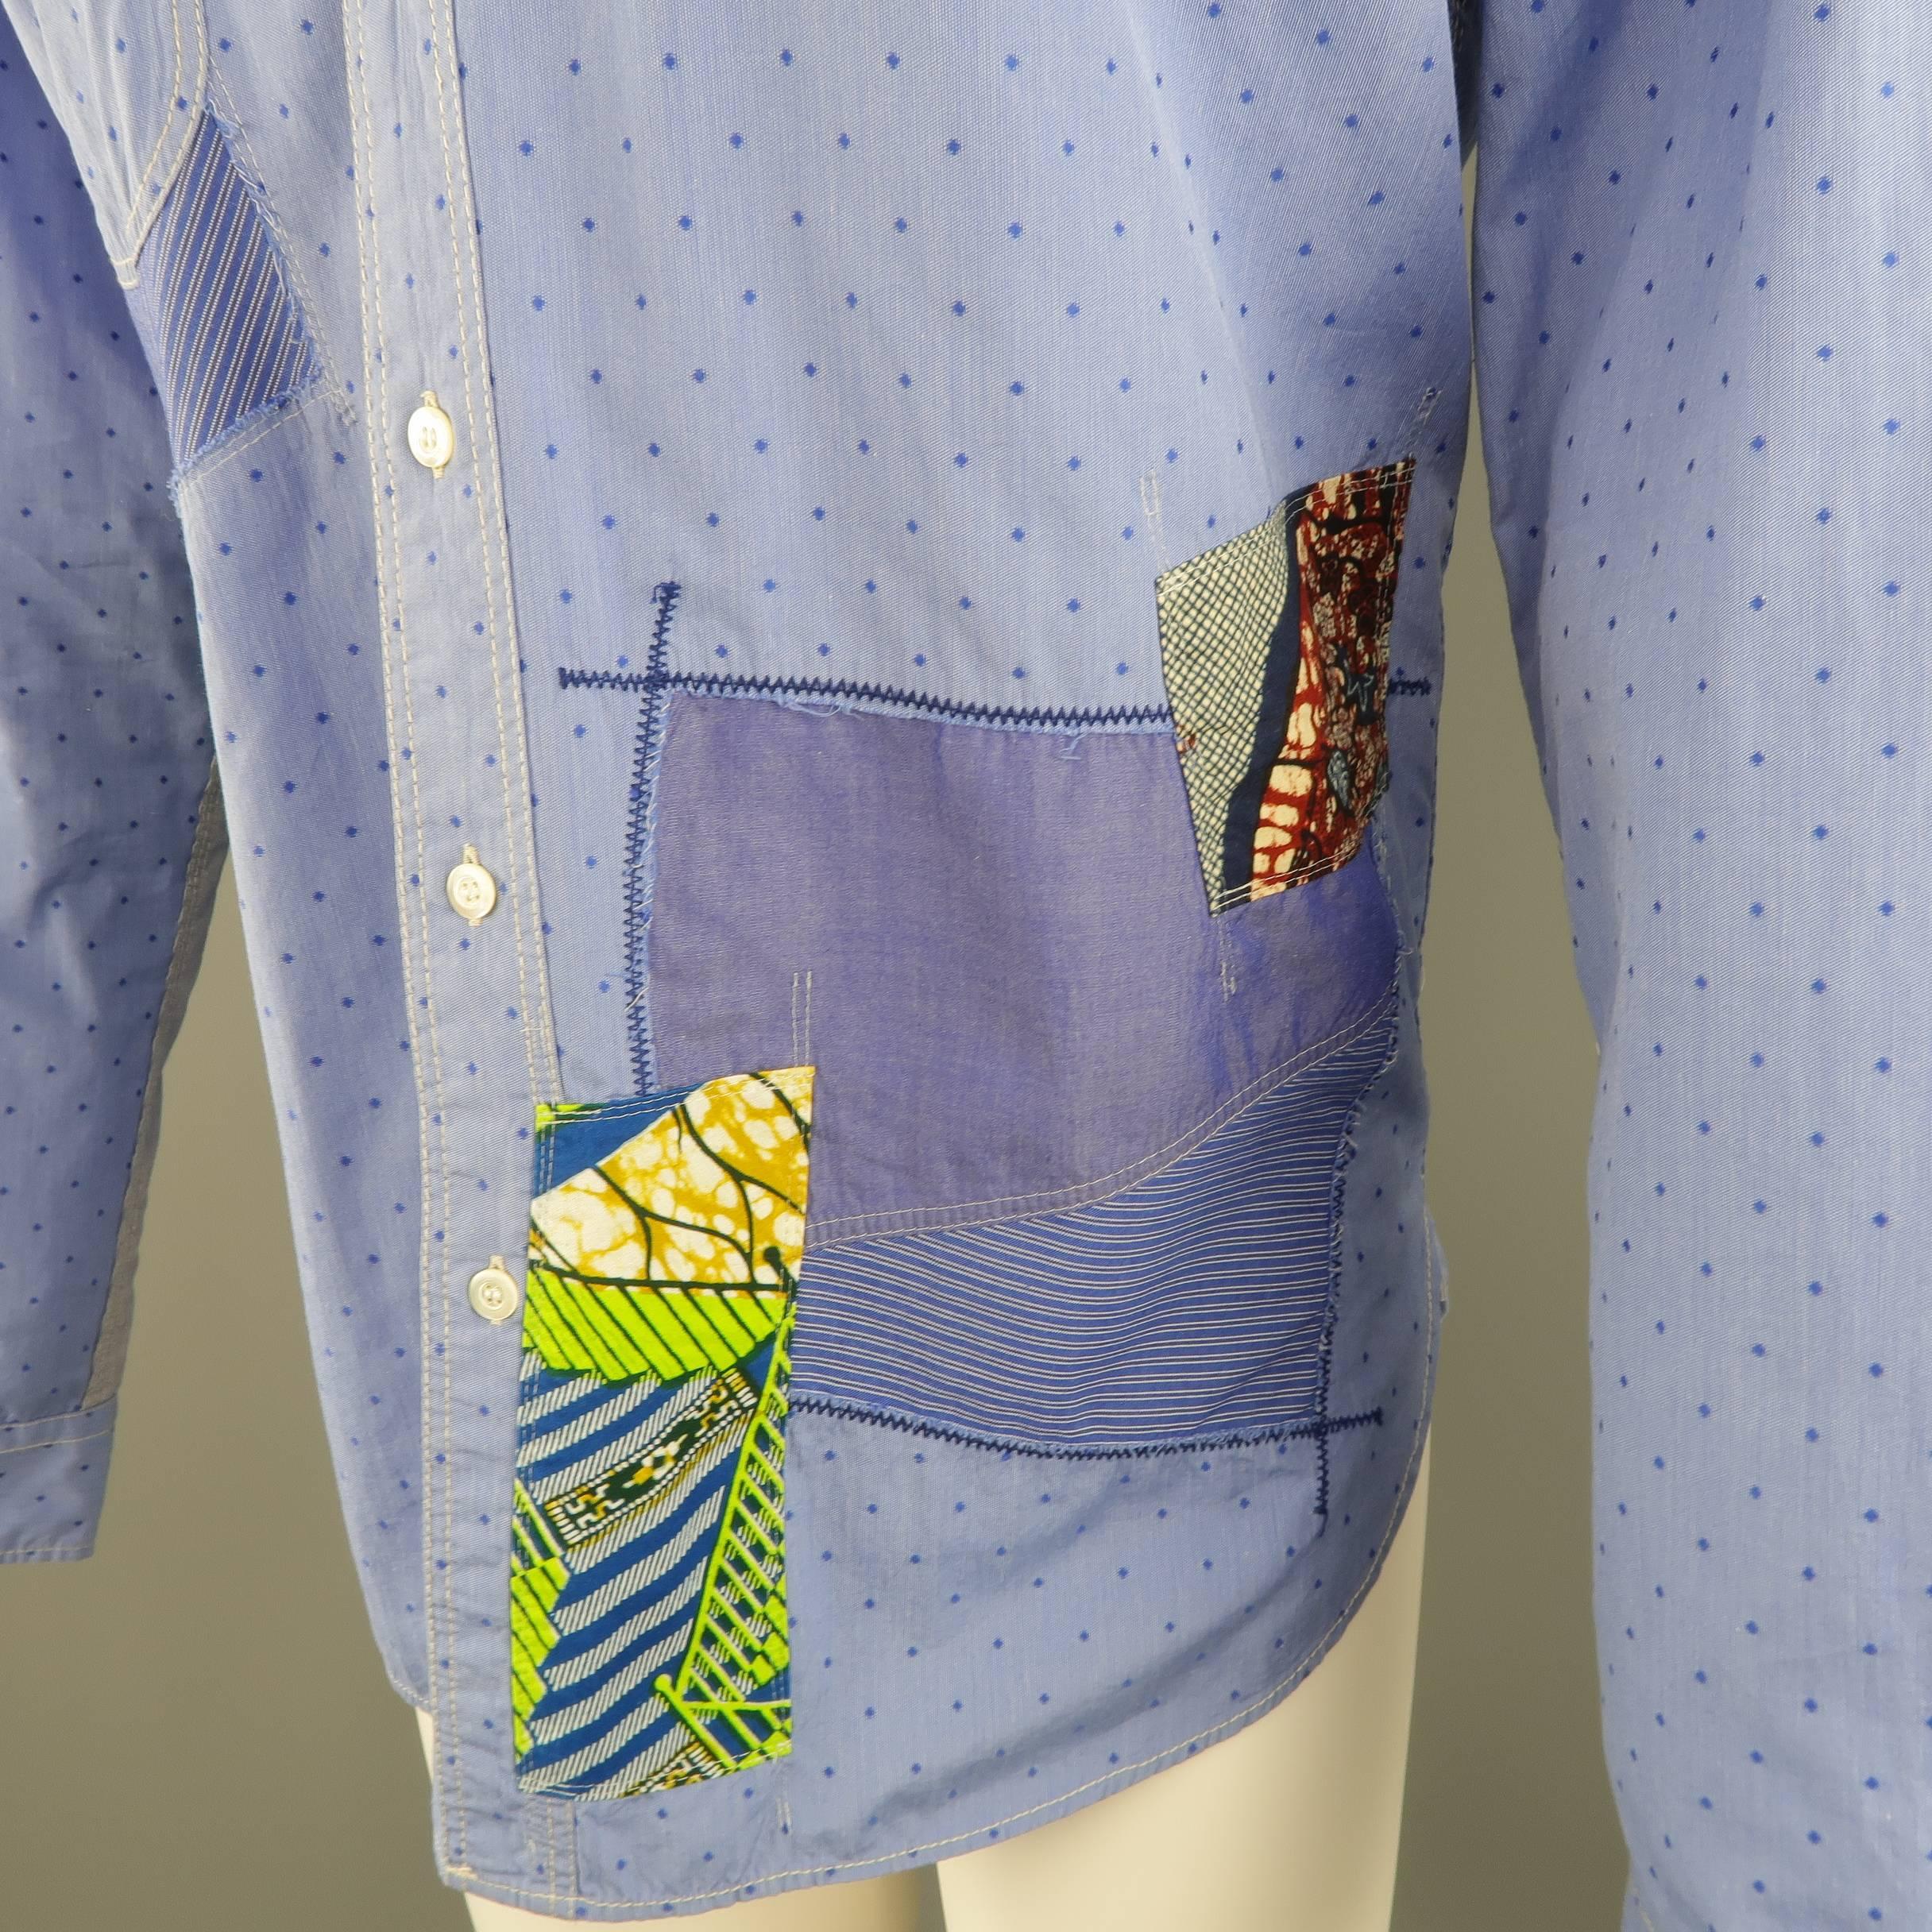 JUNYA WATANABE MAN shirt comes in spotted blue cotton with a pointed collar, patch pocket, and printed patchwork motif. Made in Italy.
 
Excellent Pre-Owned Condition.
Marked: L
 
Measurements:
 
Shoulder: 17 in.
Chest: 46 in.
Sleeve: 27 in.
Length: